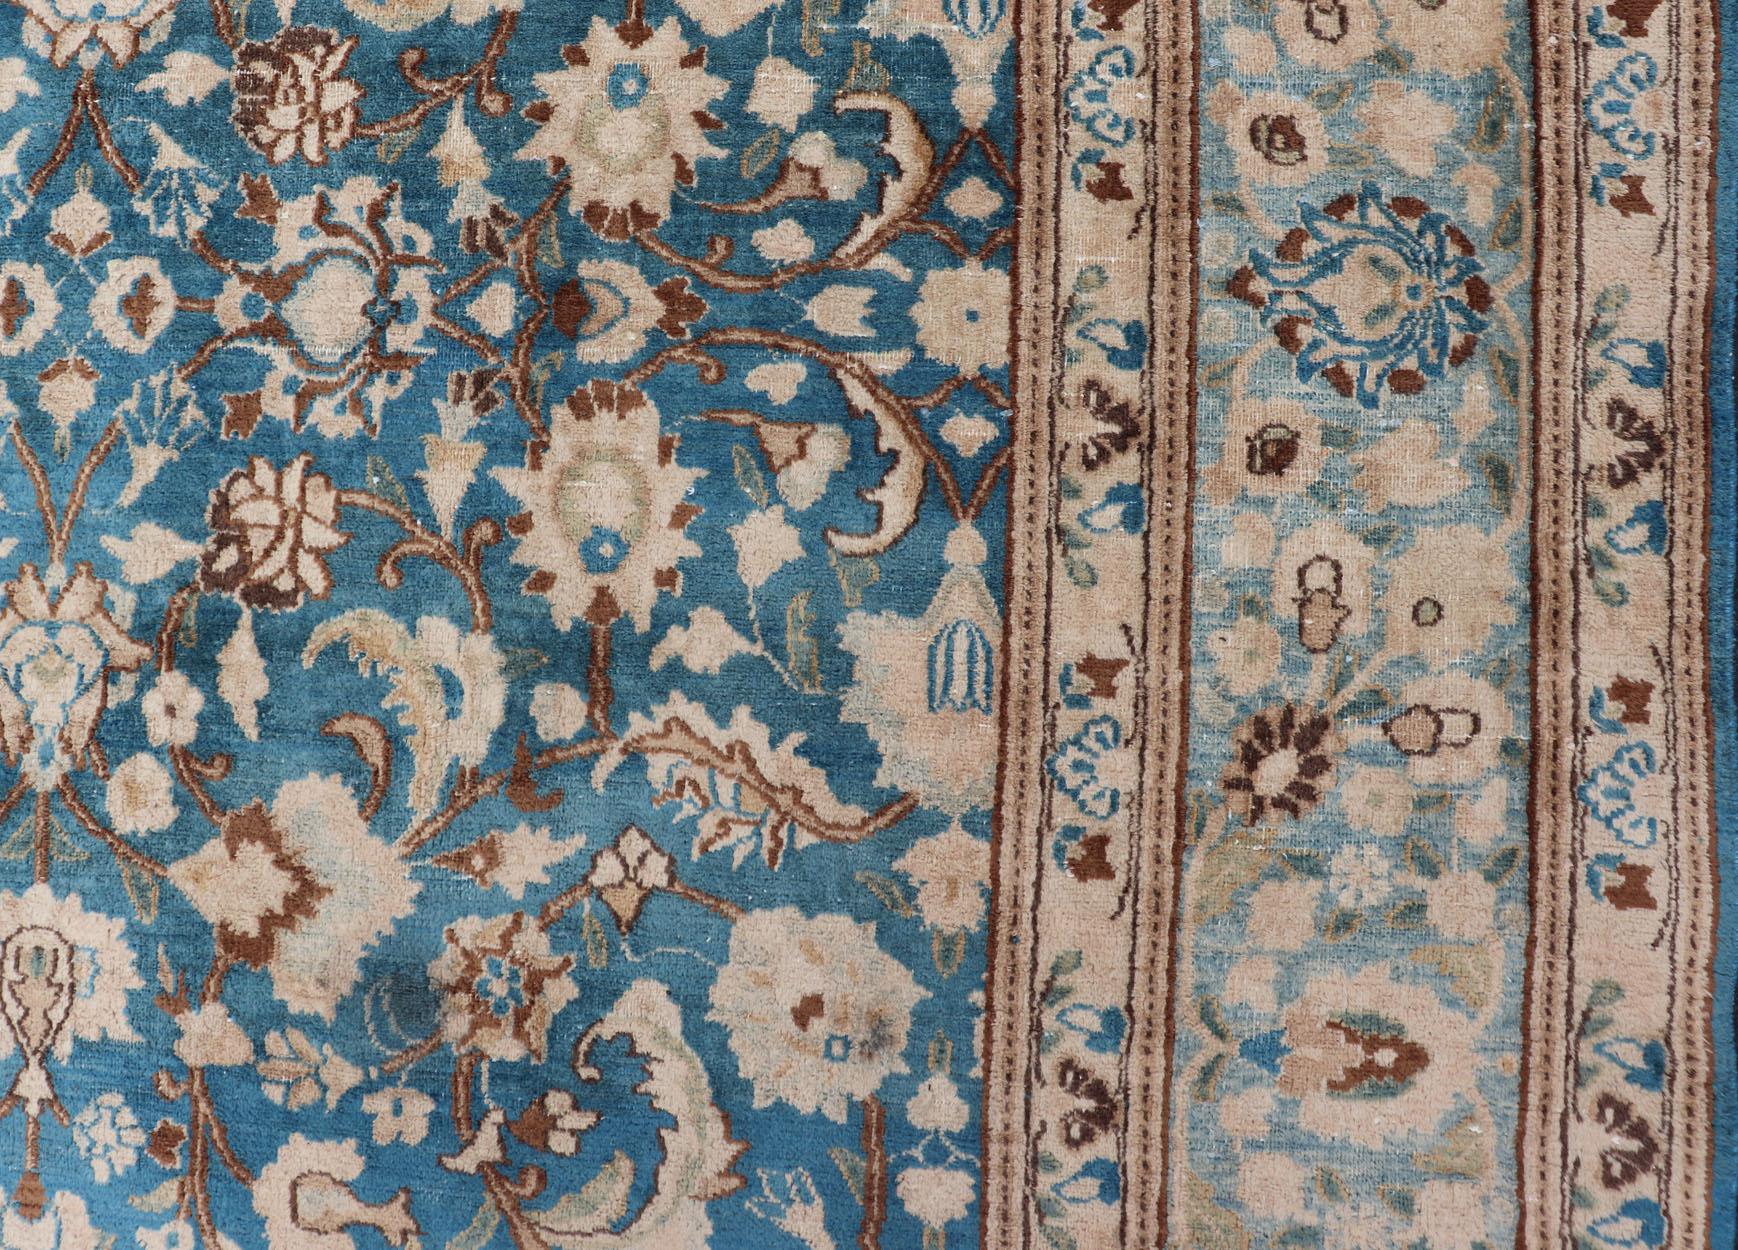 Turquoise Blue Background Antique Persian Khorassan Rug with Light Blue Border 13